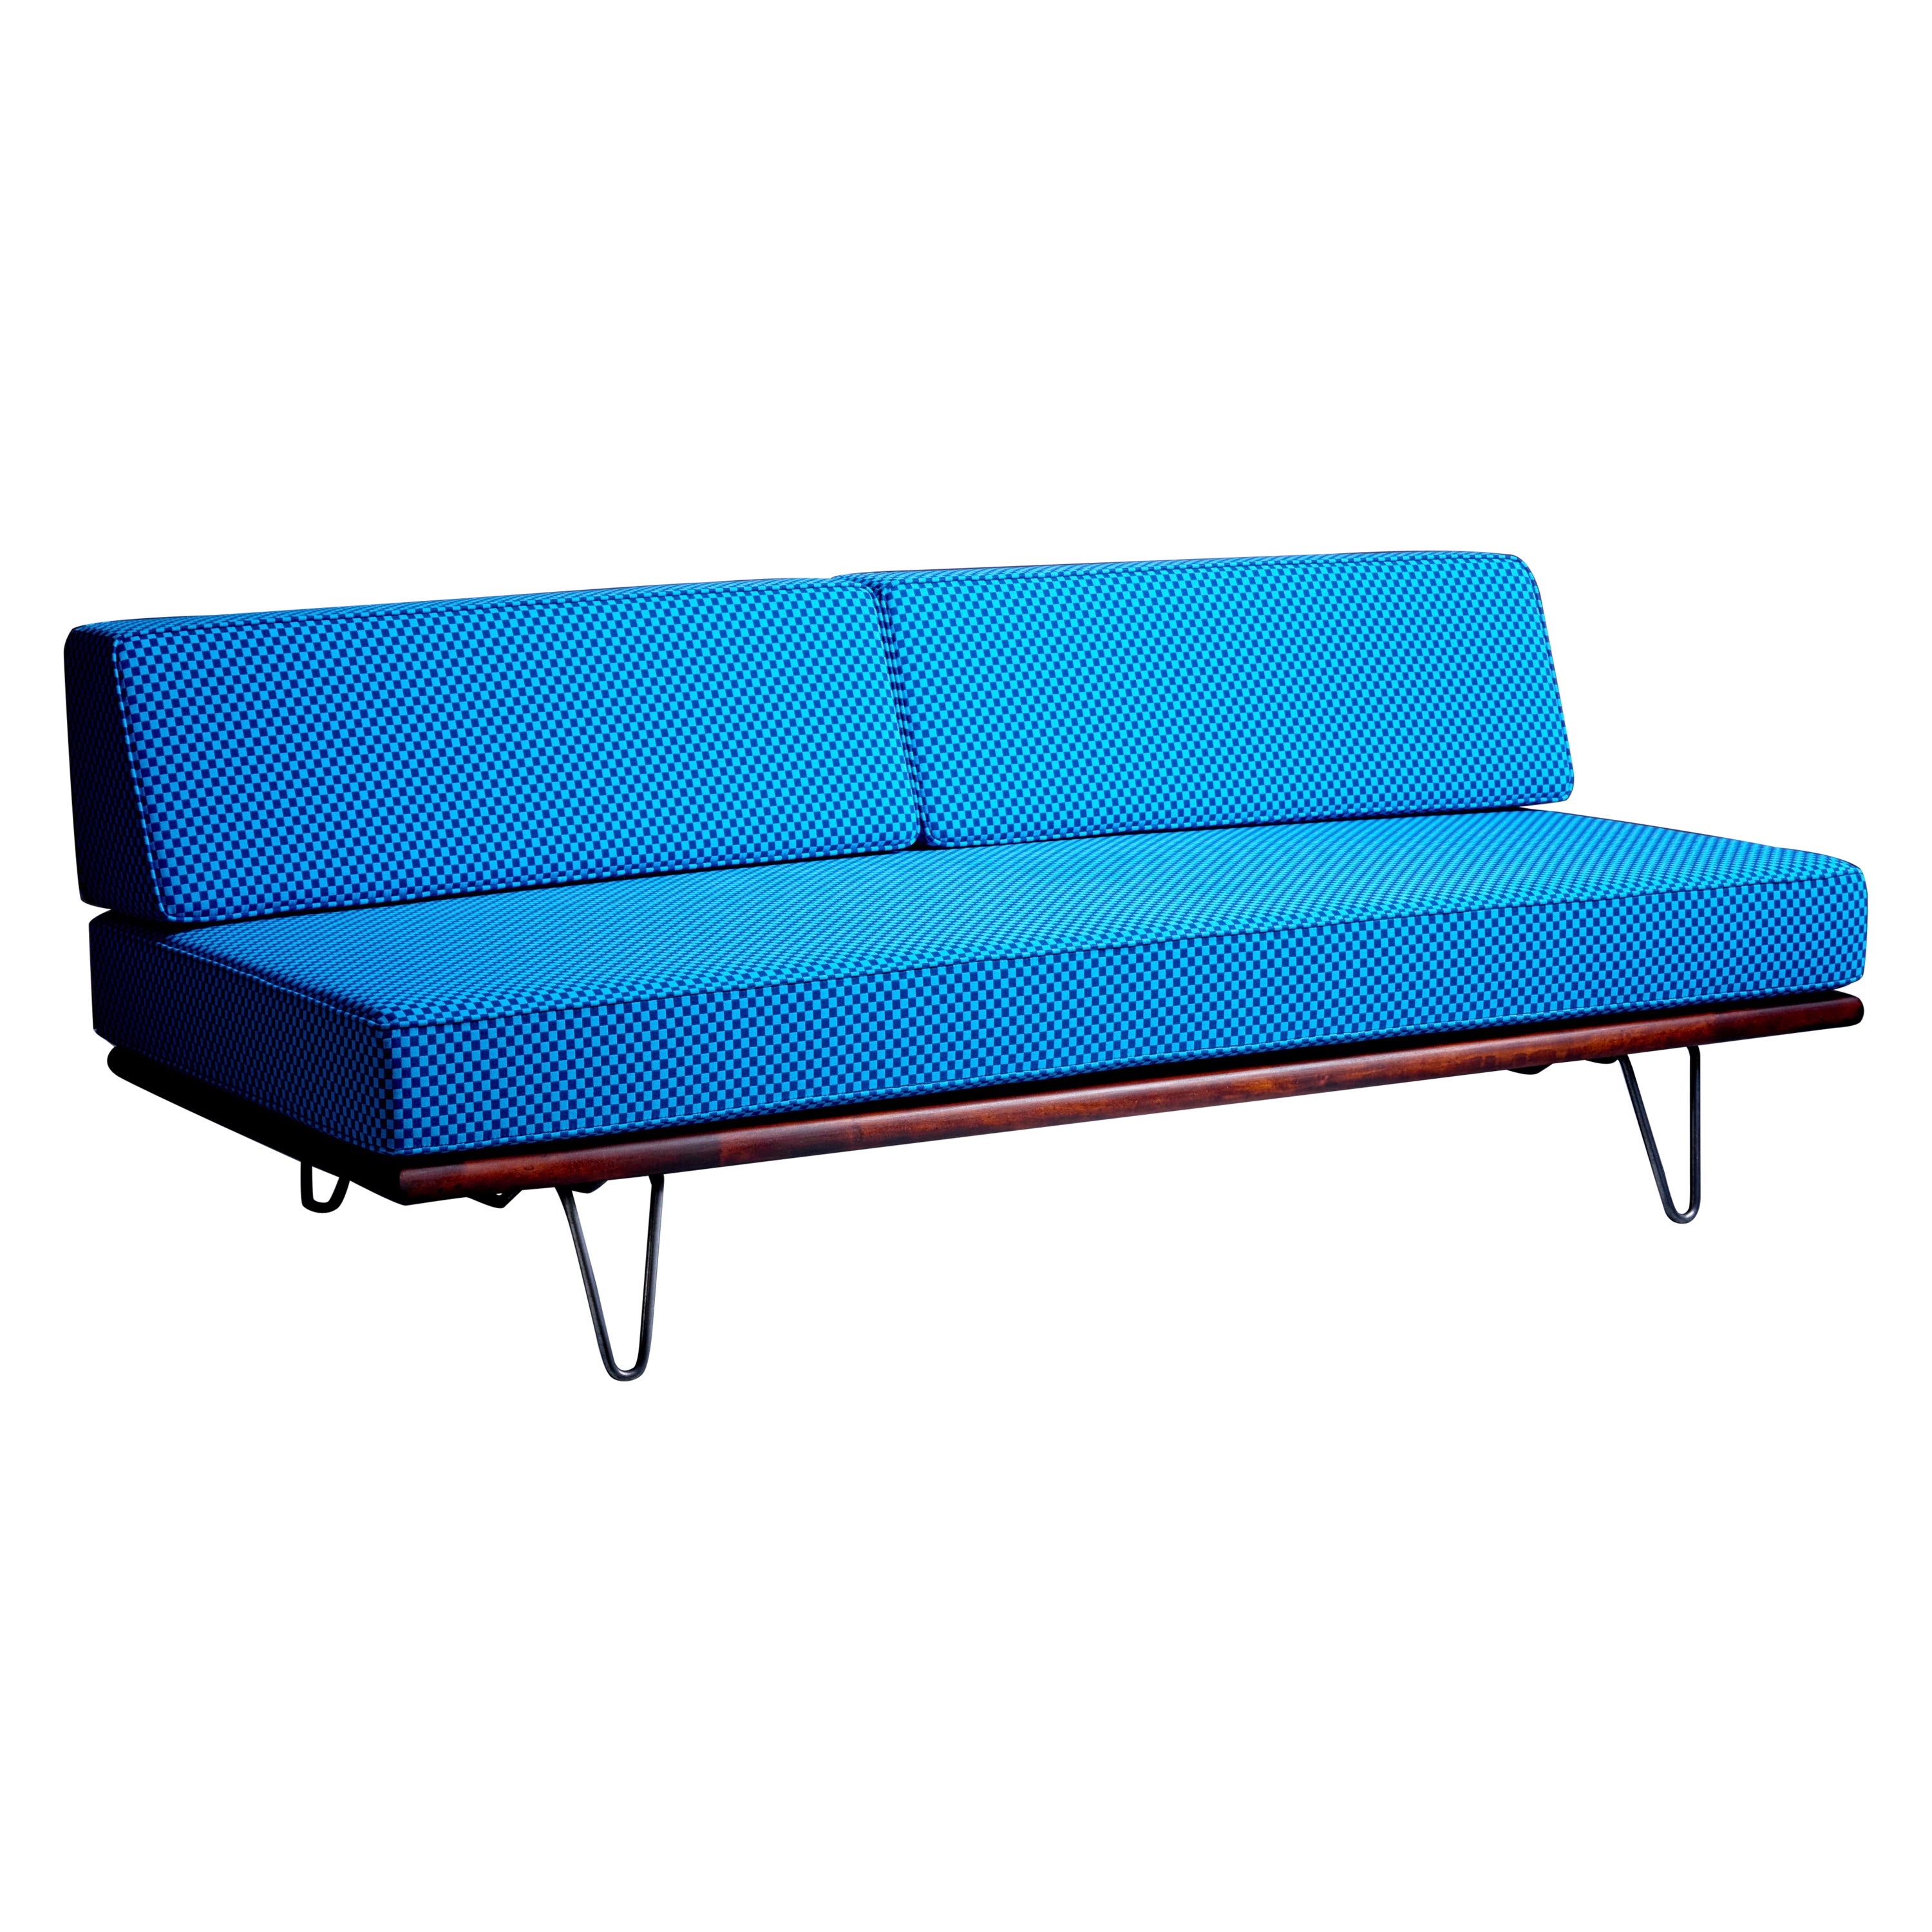 George Nelson Daybed Sofa in Blue Checker Reupholstery by Alexander Girard For Sale